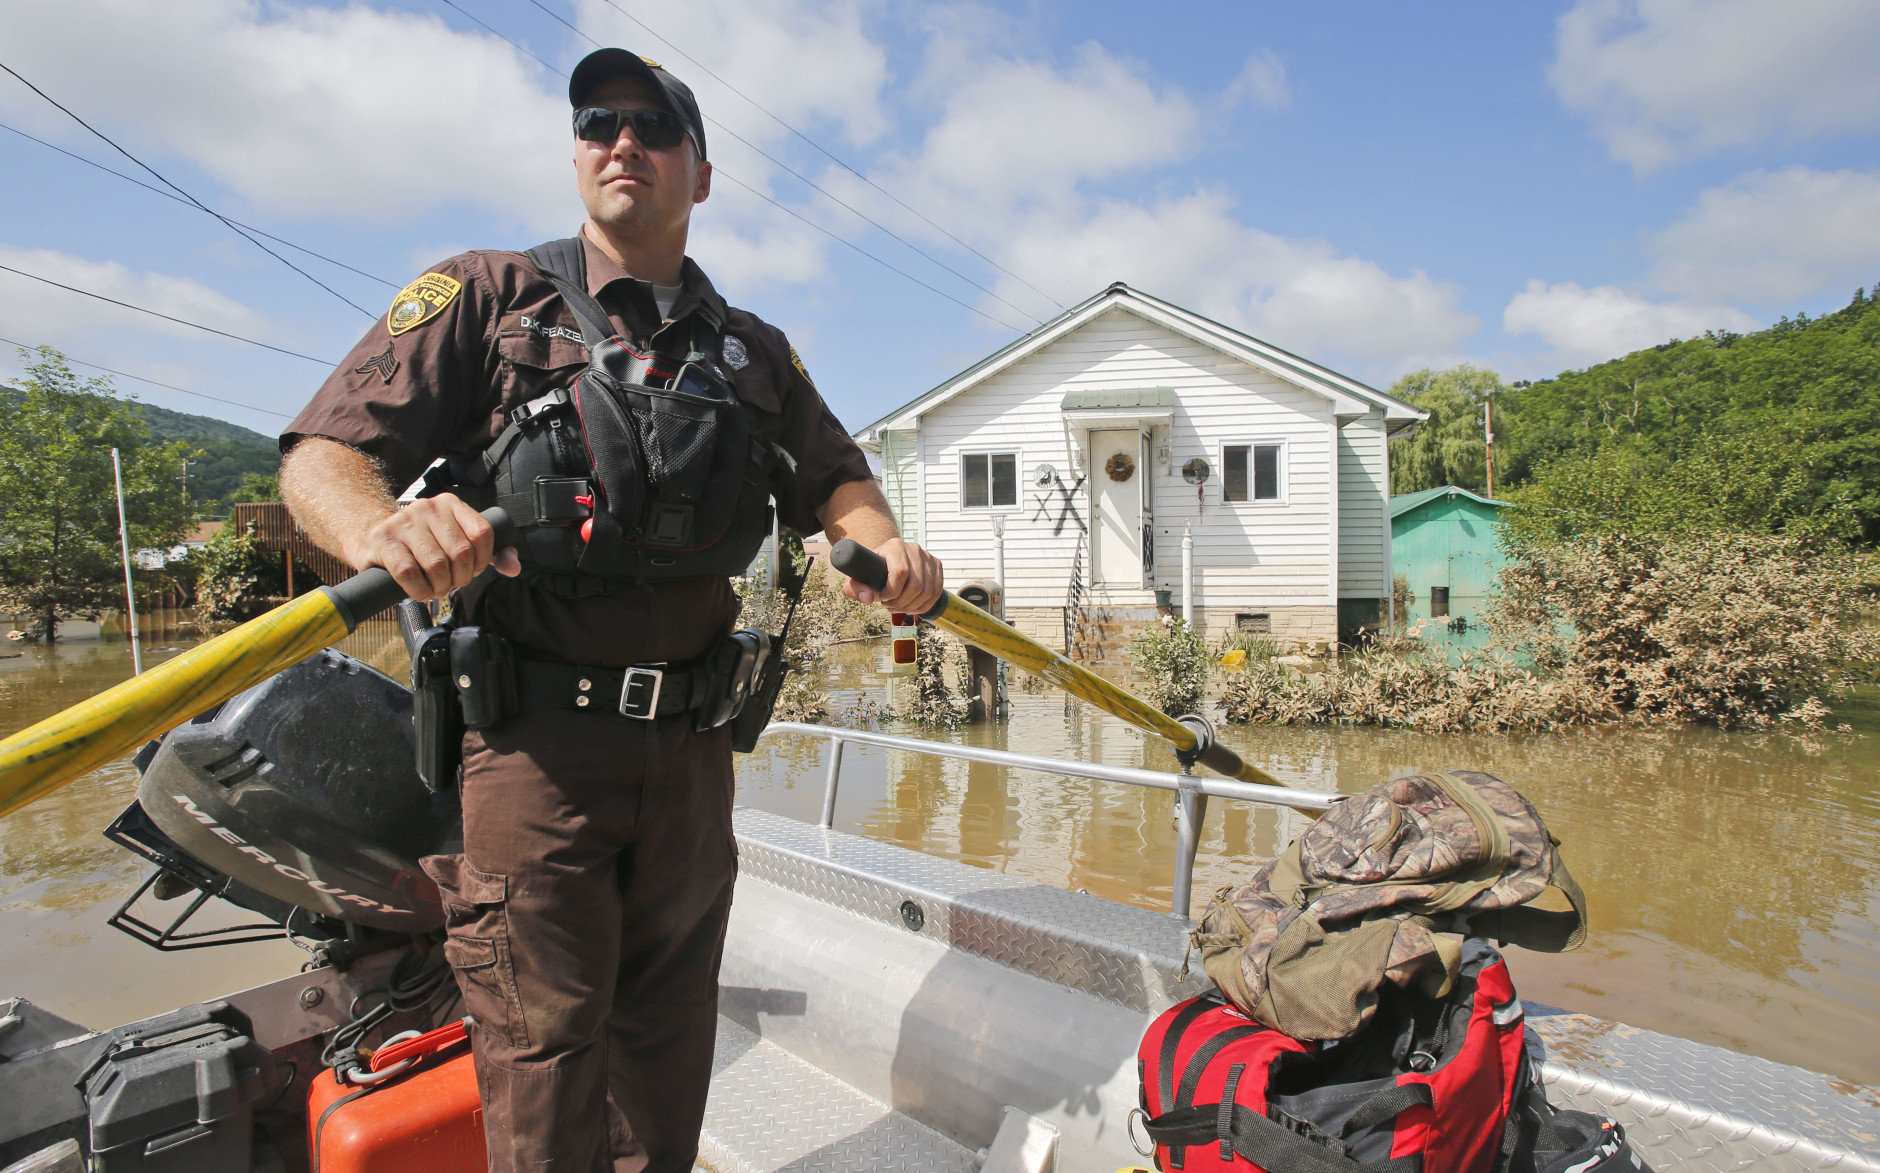 Lt. Dennis Feazell, of the West Virginia Department of Natural Resources, holds his boat at station as he and a co-worker search flooded homes in Rainelle, W. Va., Saturday, June 25, 2016.   There were several fatalities in the area with three people unaccounted for.   (AP Photo/Steve Helber)